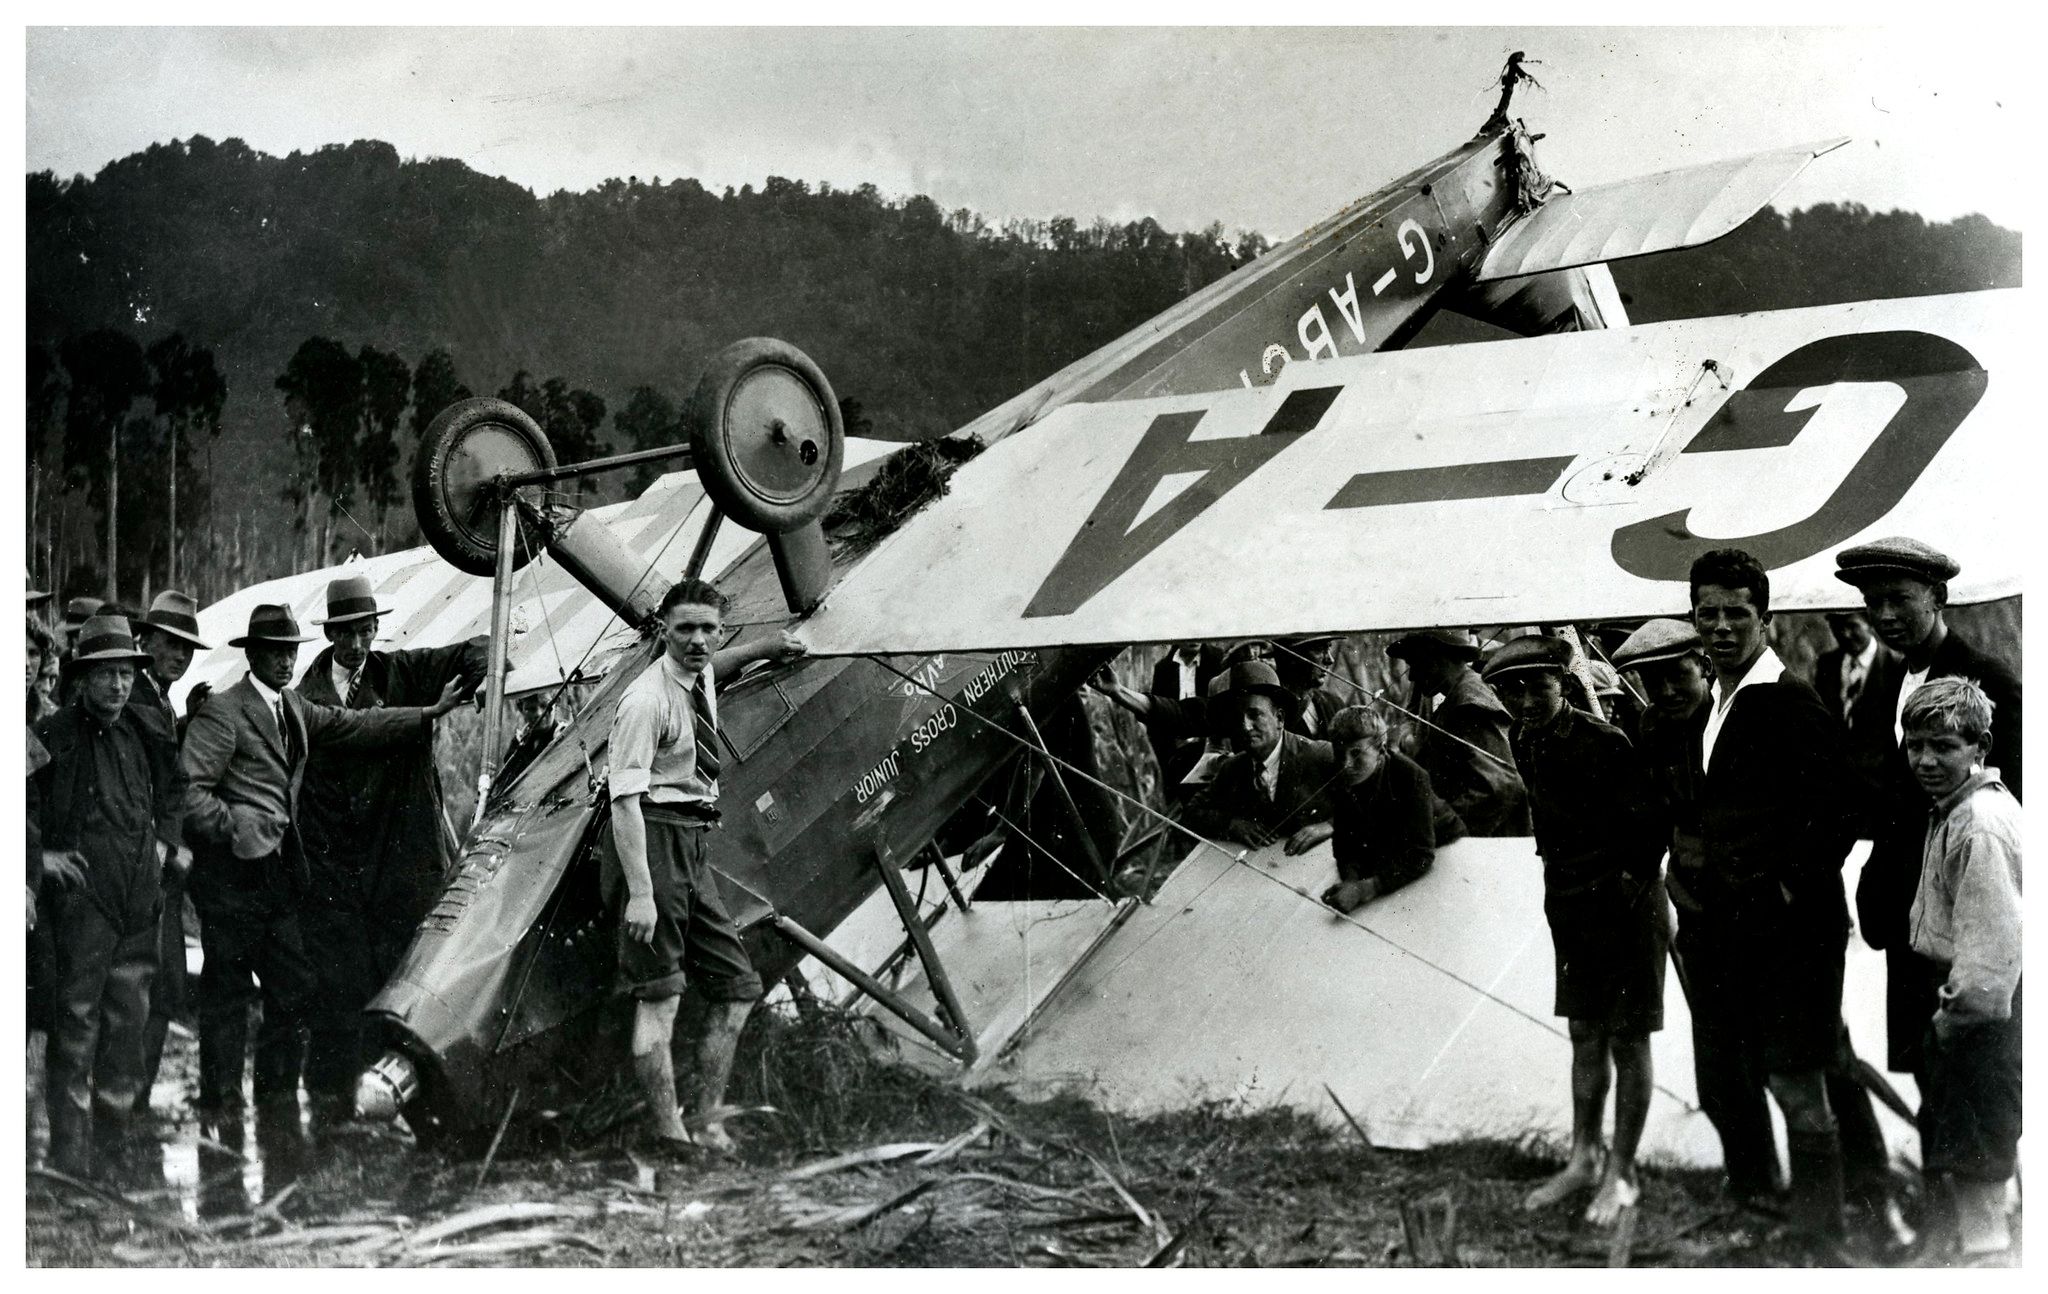 Many people stnading near a biplane that flipped over and crashed .